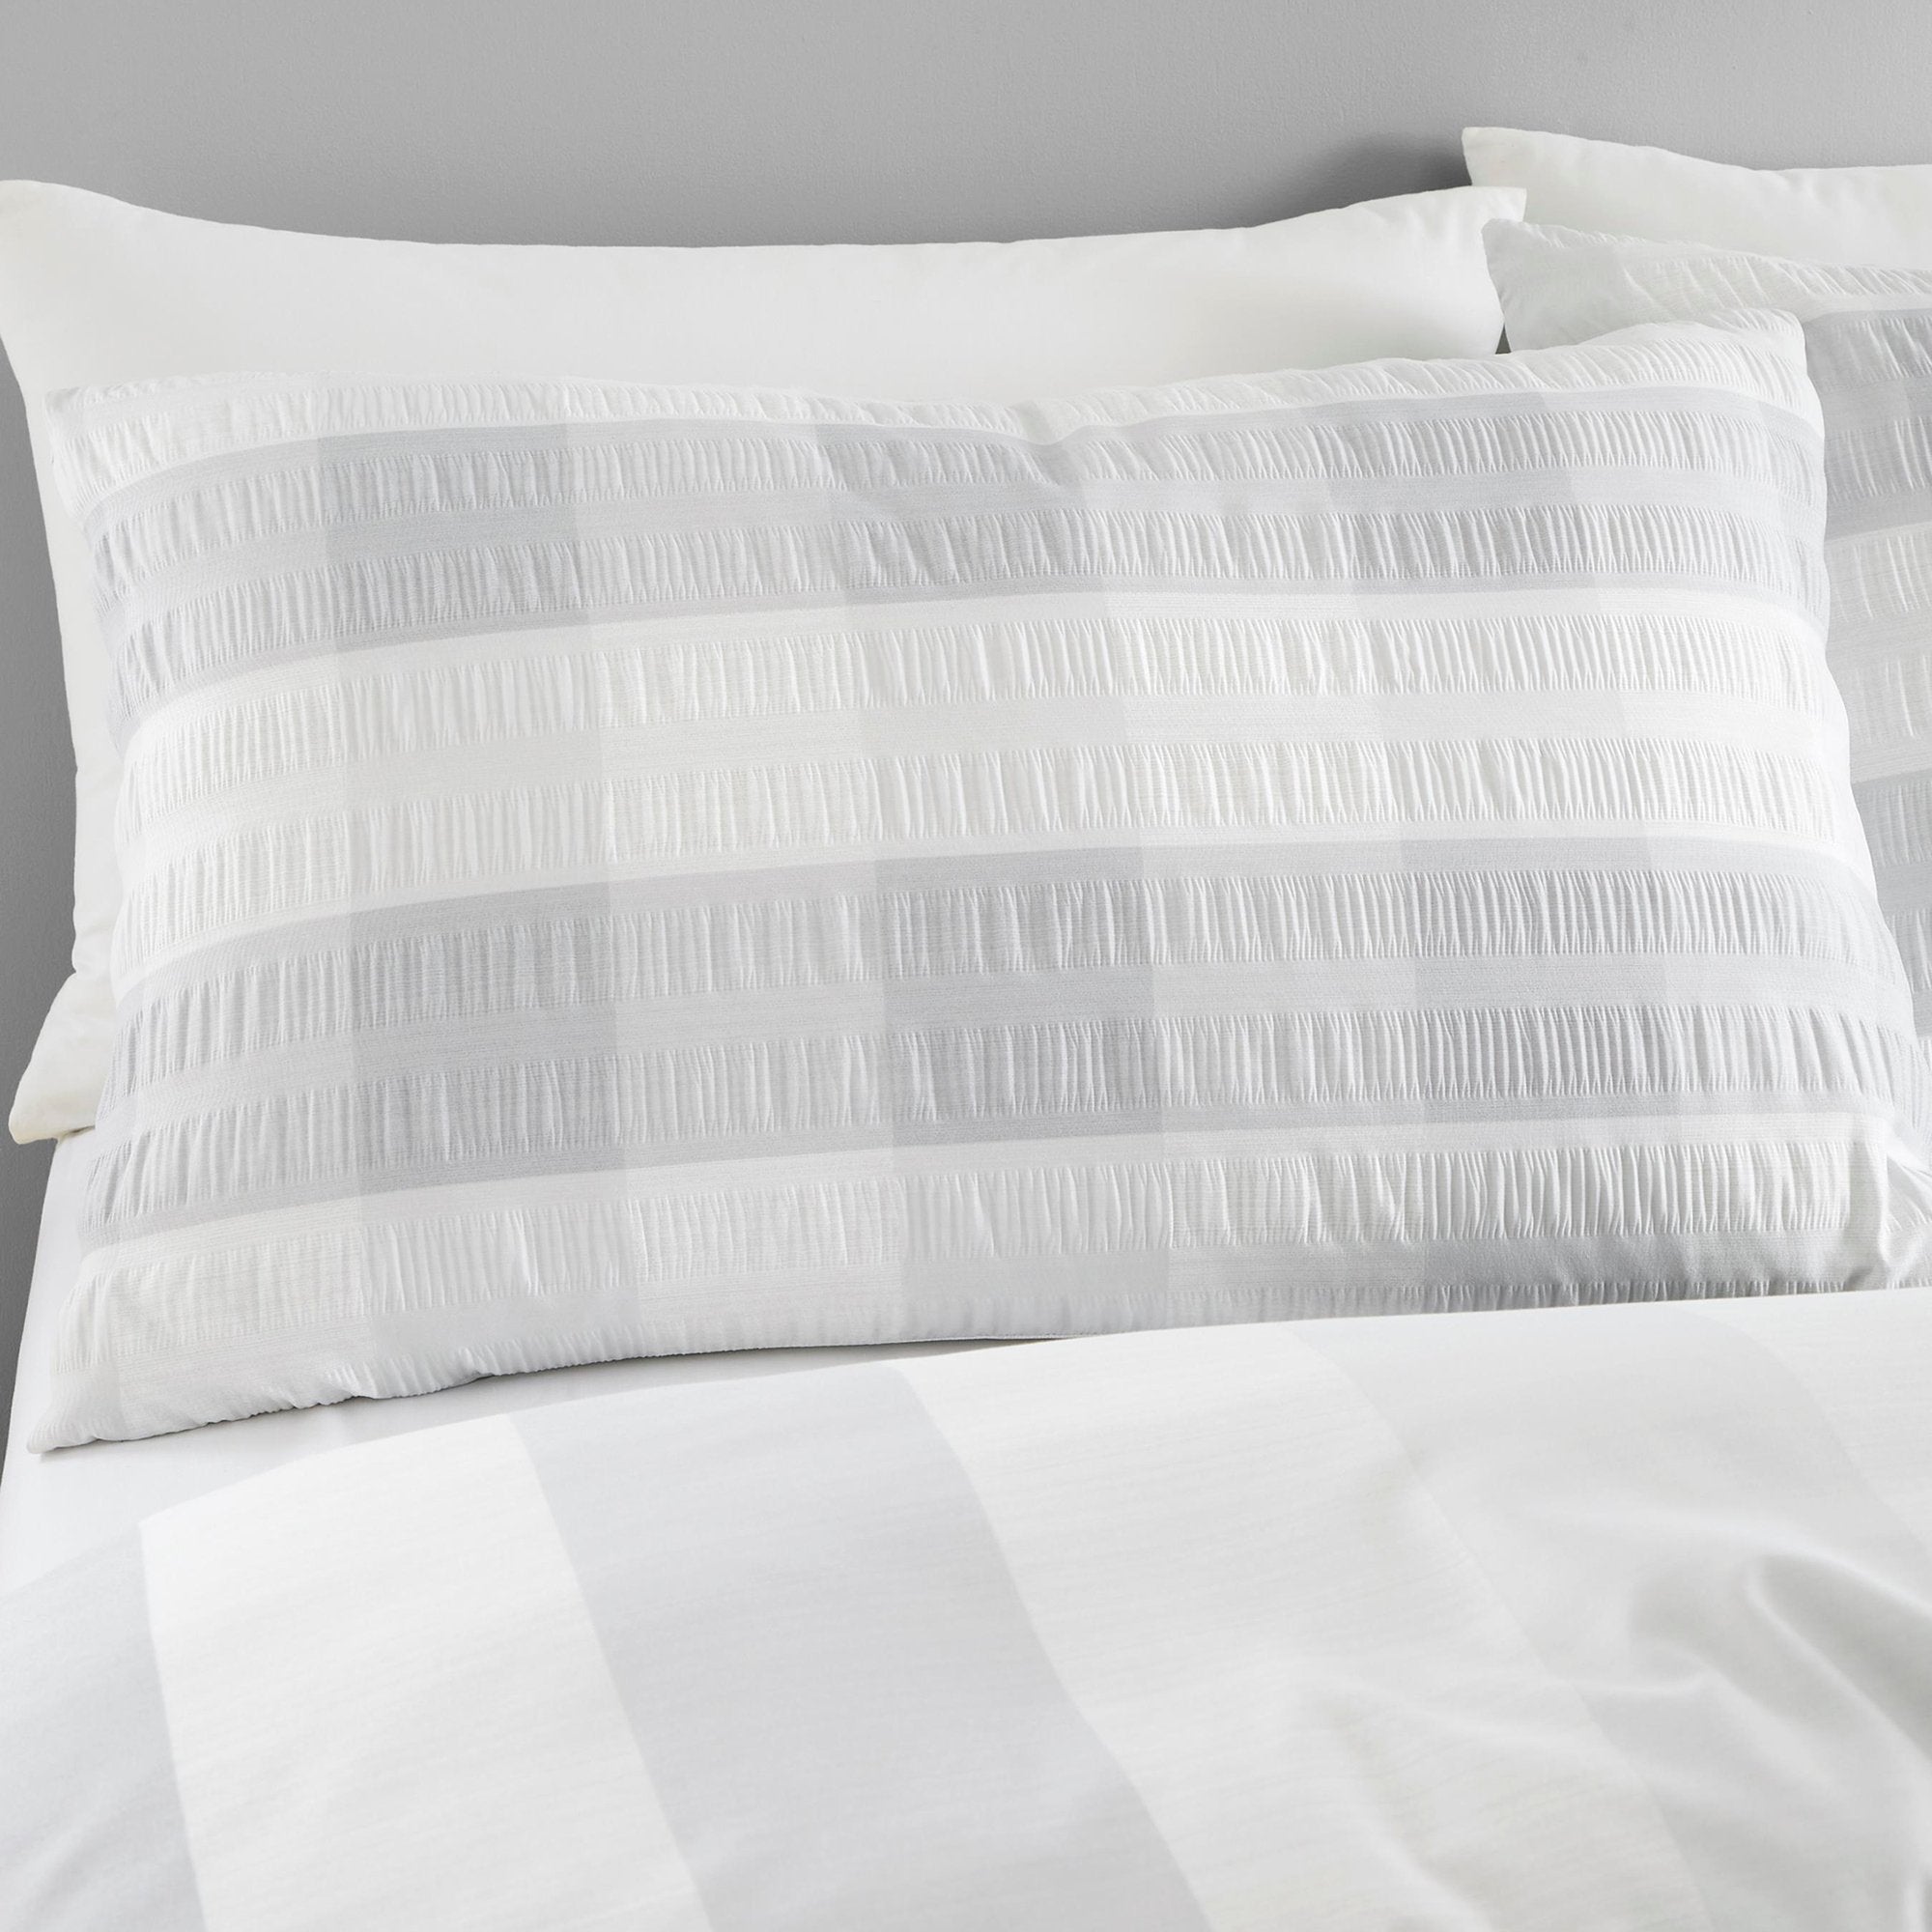 Duvet Cover Set Seersucker Gingham by Fusion in Silver